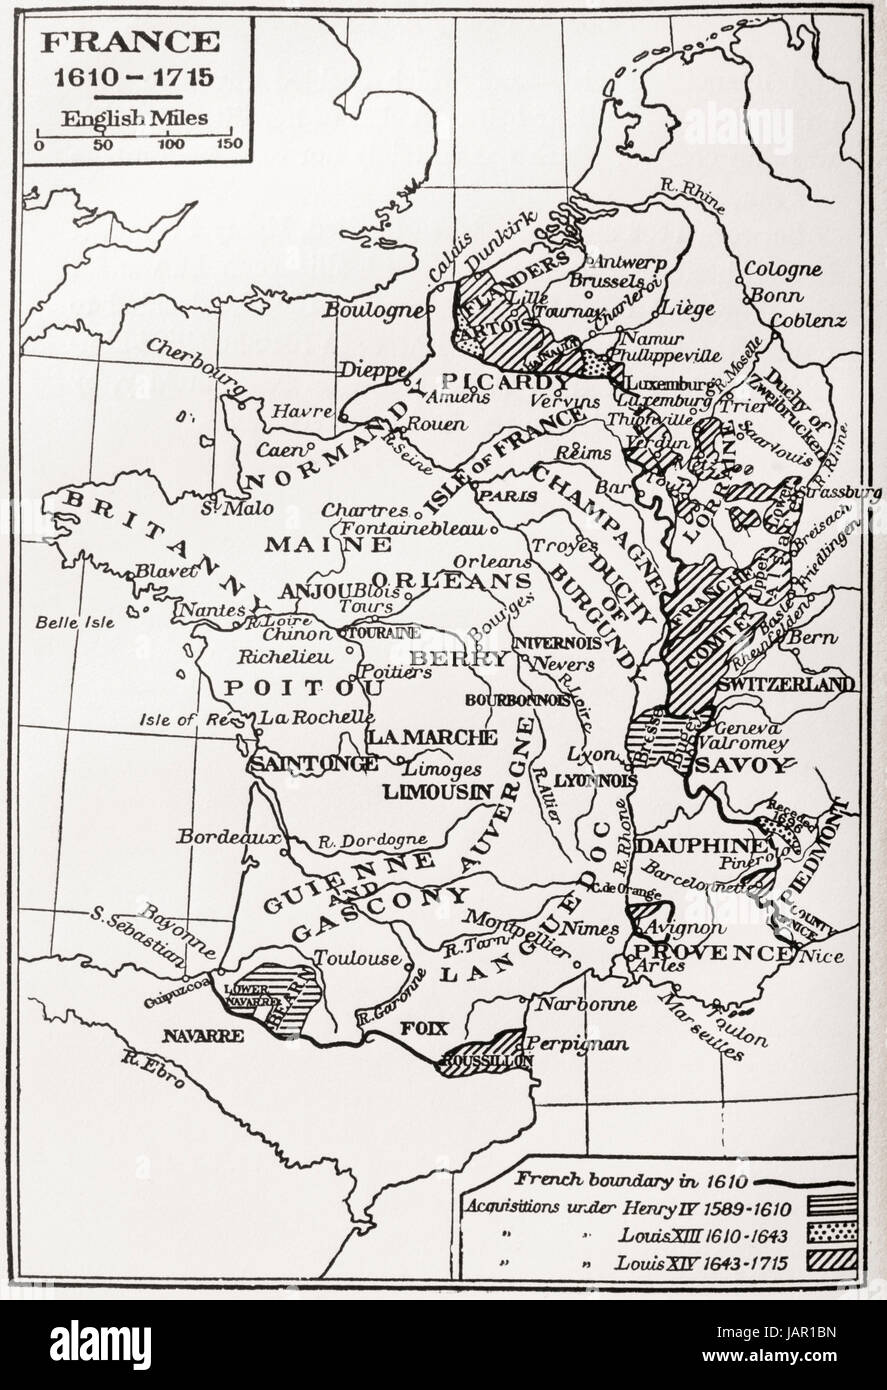 Map of France, 1610 - 1715. From France, Mediaeval and Modern A History, published 1918. Stock Photo